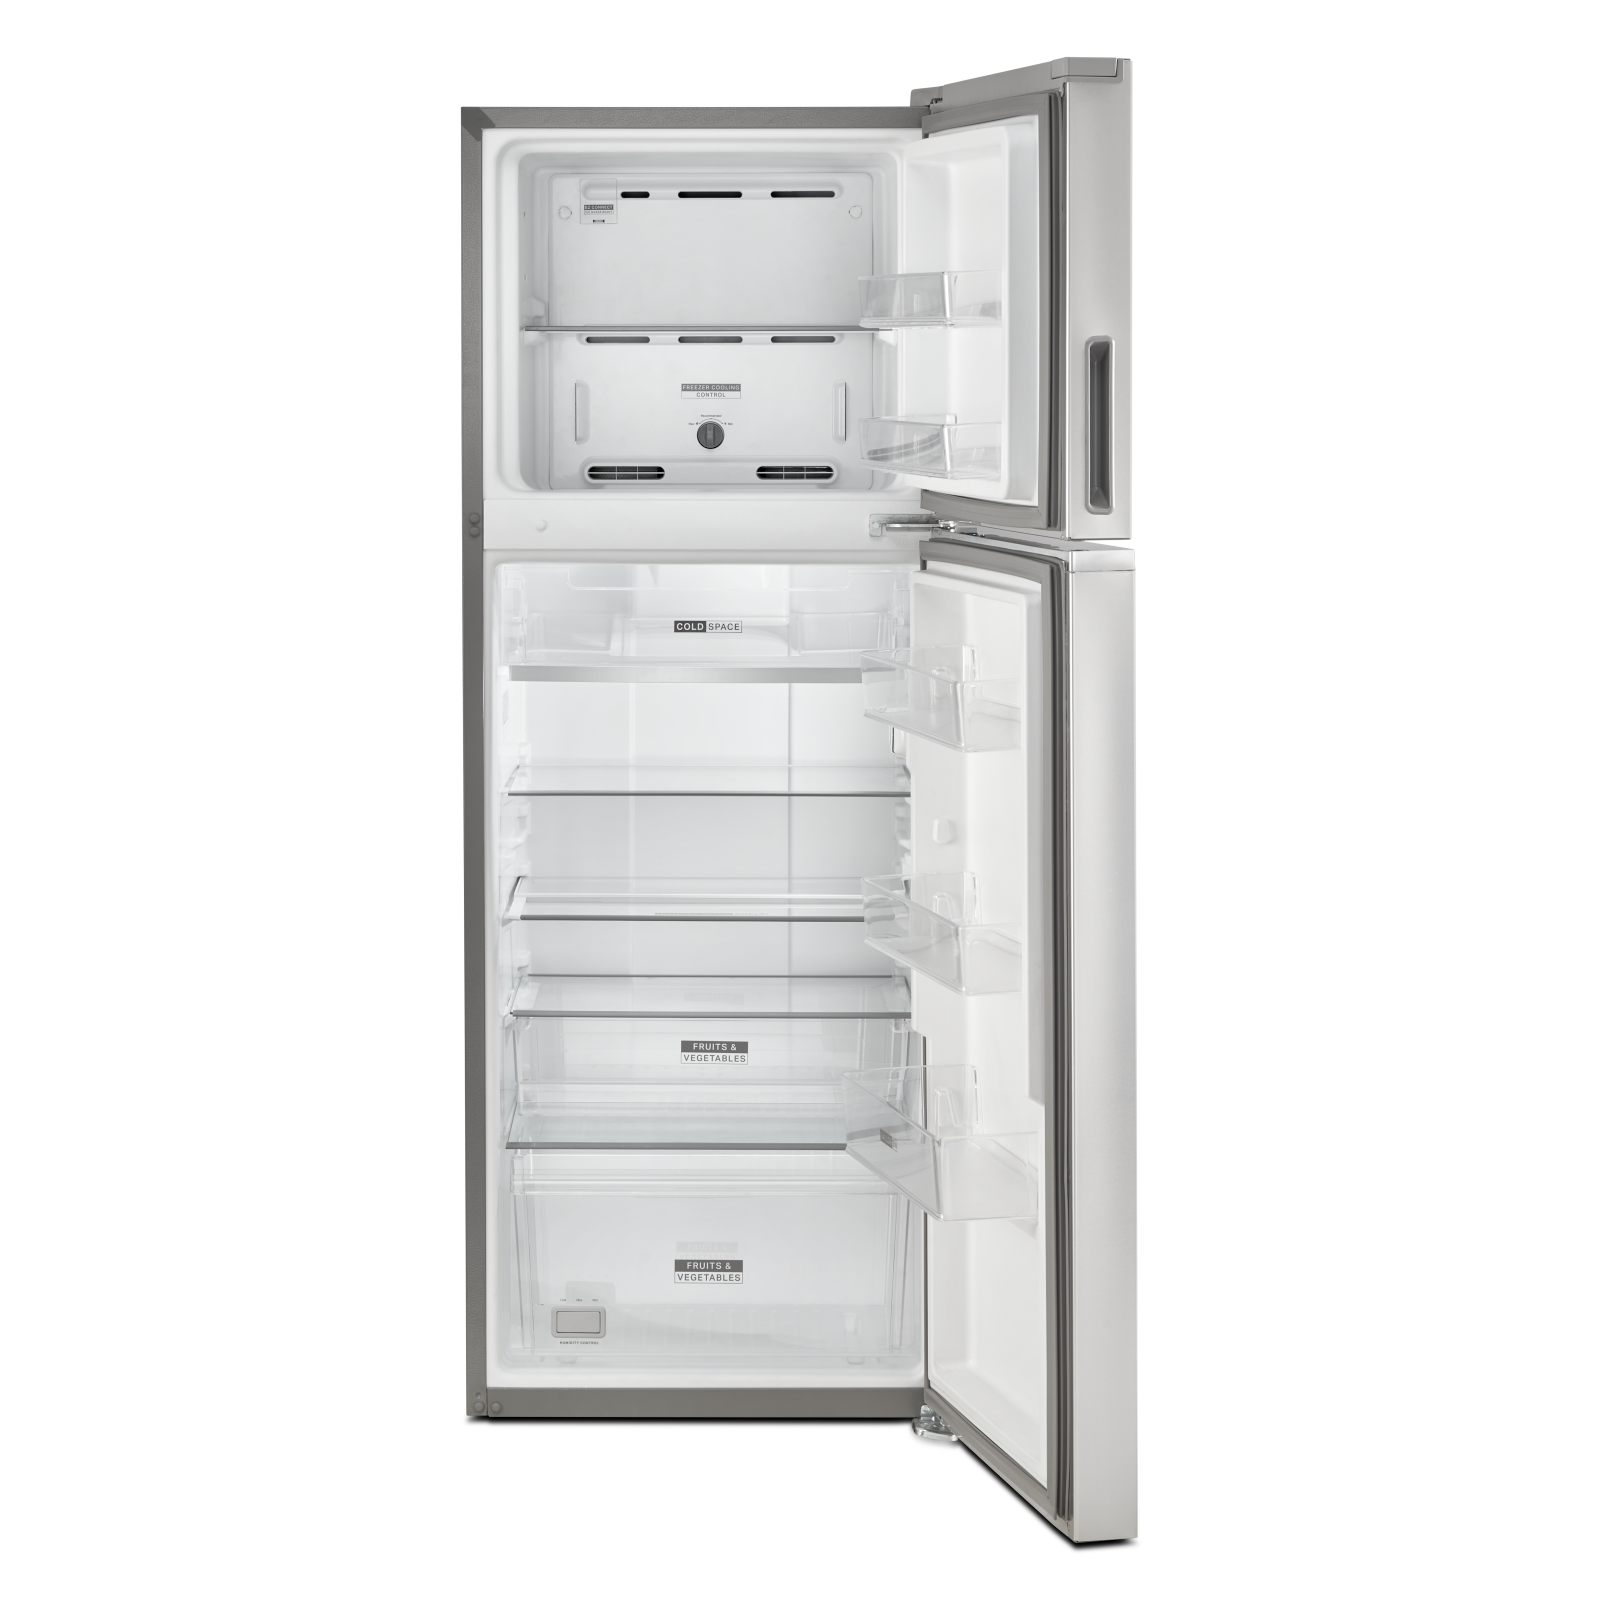 Whirlpool - 24.375 Inch 12.9 cu. ft Top Mount Refrigerator in Stainless - WRT313CZLZ